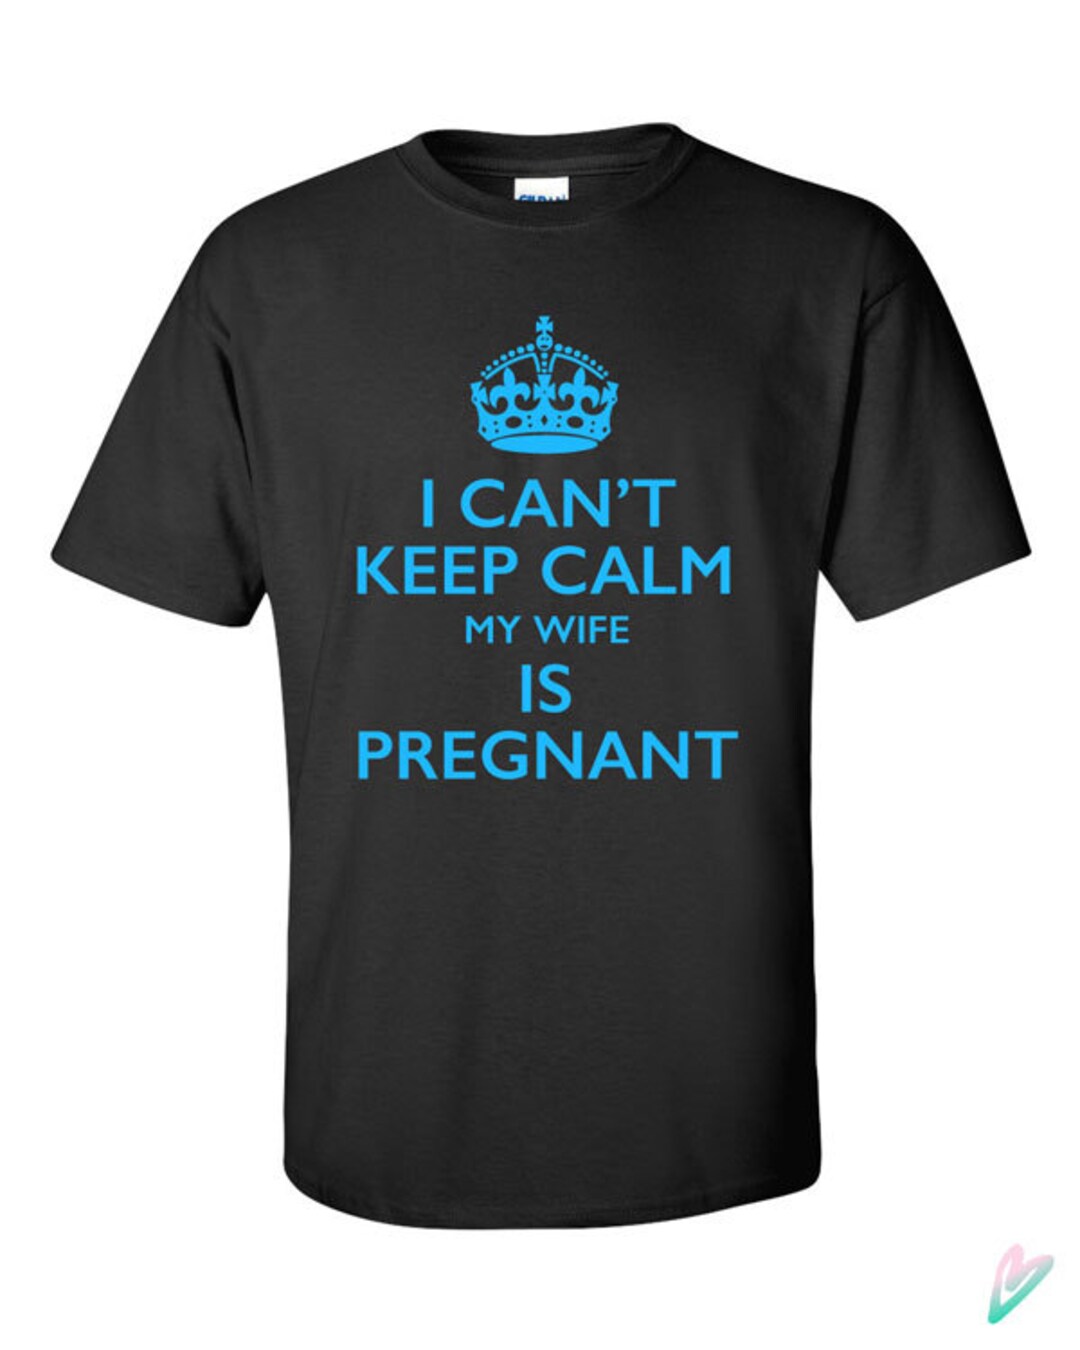 I Can't Keep Calm My Wife is Pregnant T-shirt Tshirt Tee - Etsy